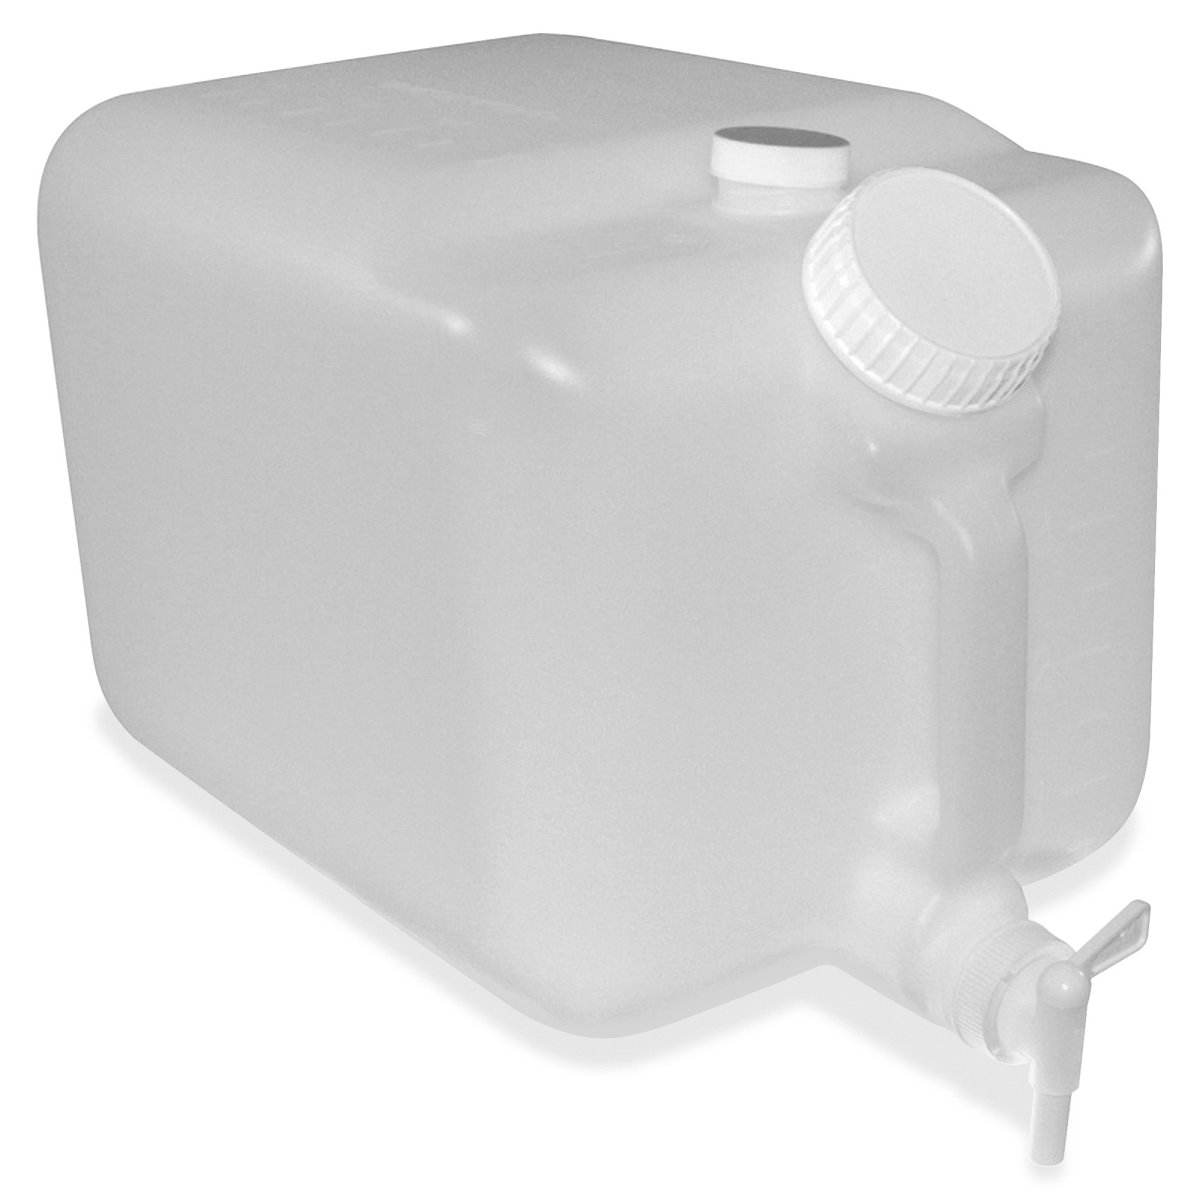 Impact Products Imp7576ct 5 Gal E-z Fill Container, Polyethylene - Translucent